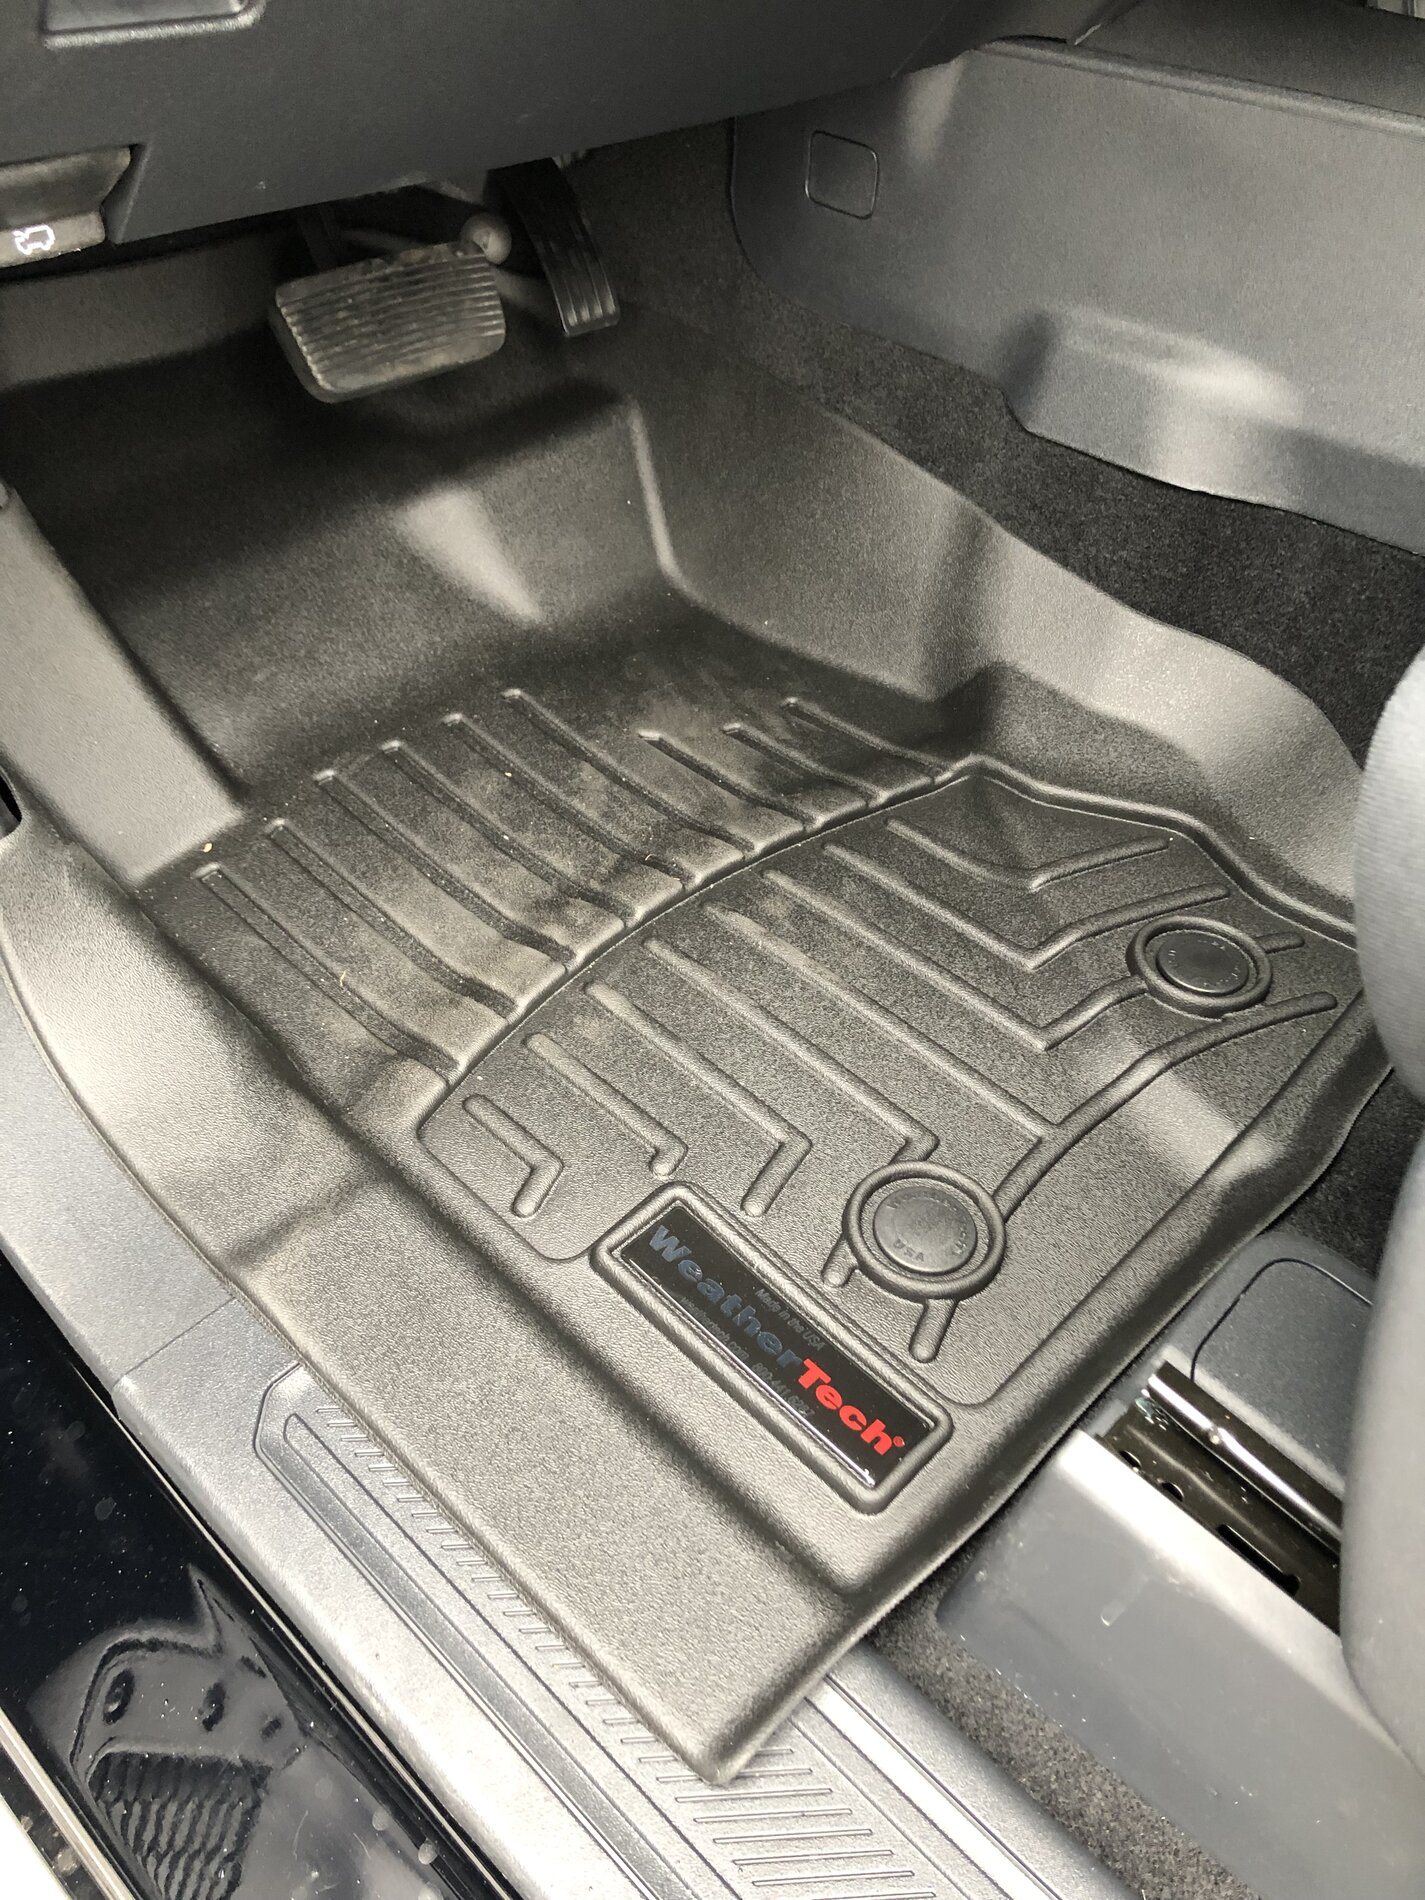 Ford Bronco Bronco Weathertech Floor Liners and Cargo Liners now available 83DC8A04-05C6-489F-B3CB-0ED089DF532C